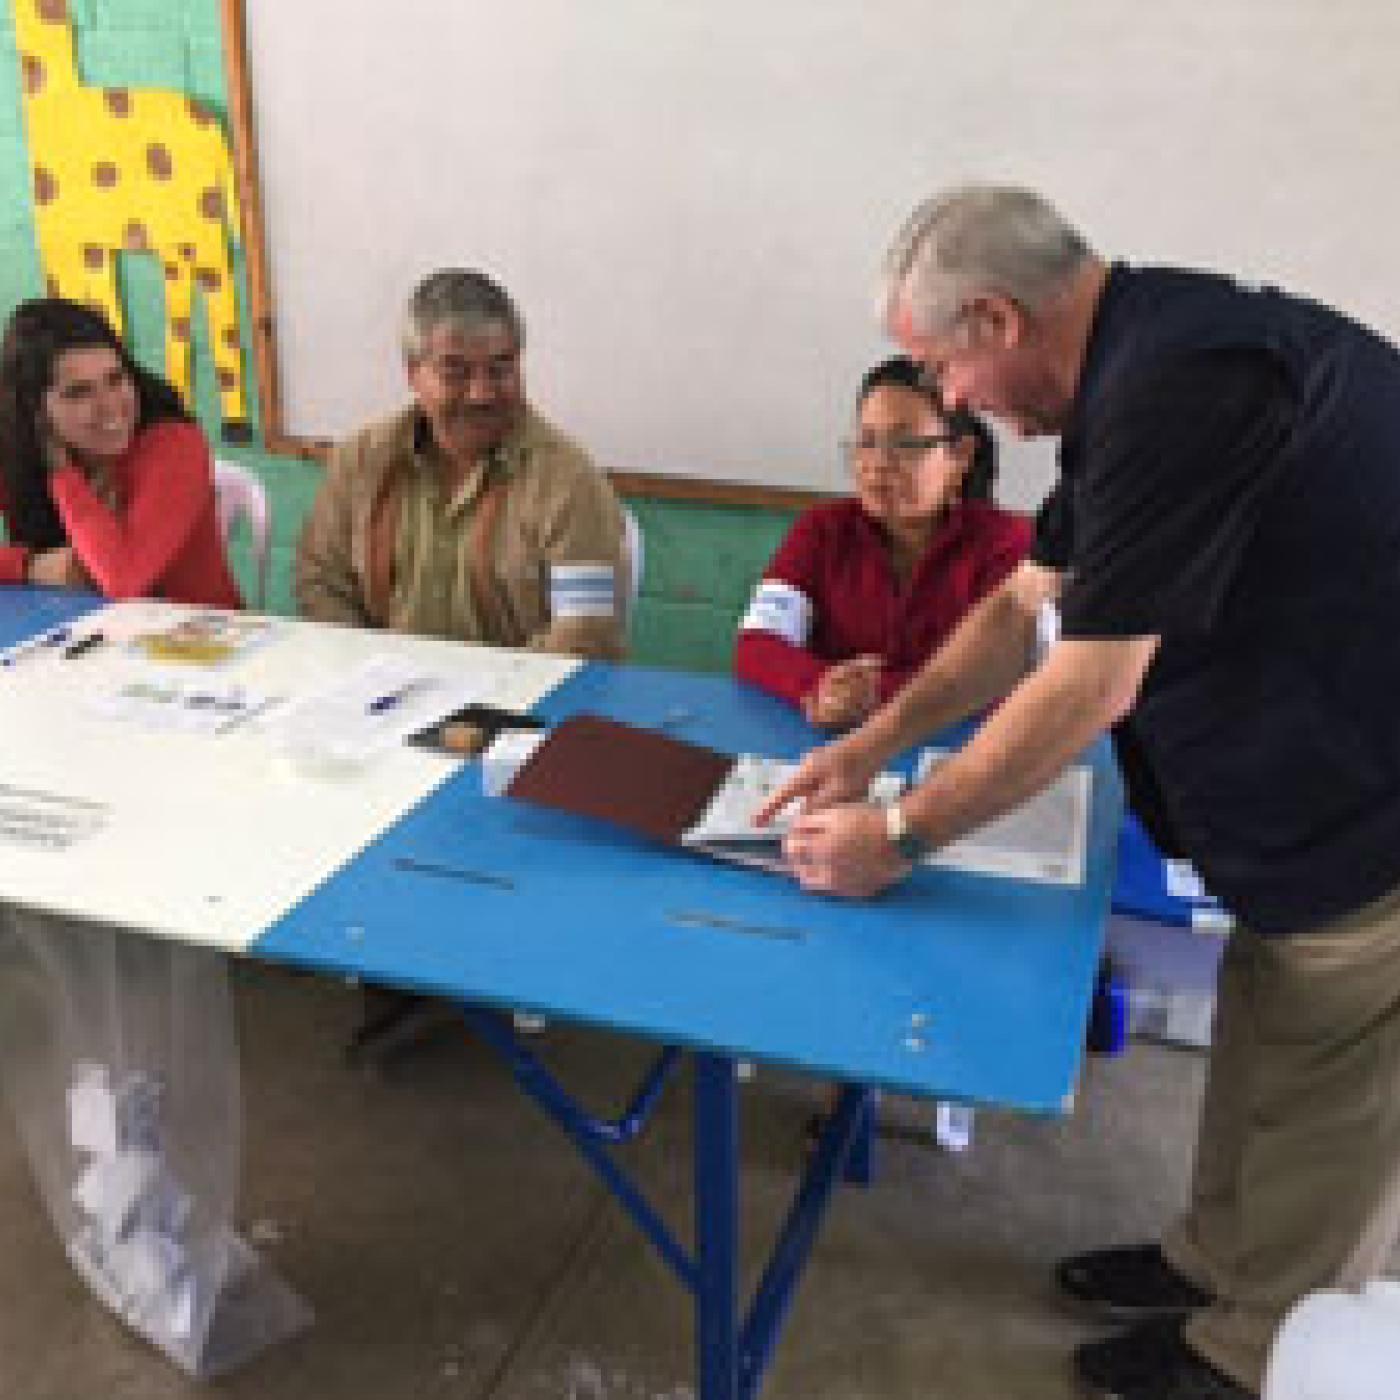 President Sweeney reviews the voter list with polling station workers in the city of Antigua.